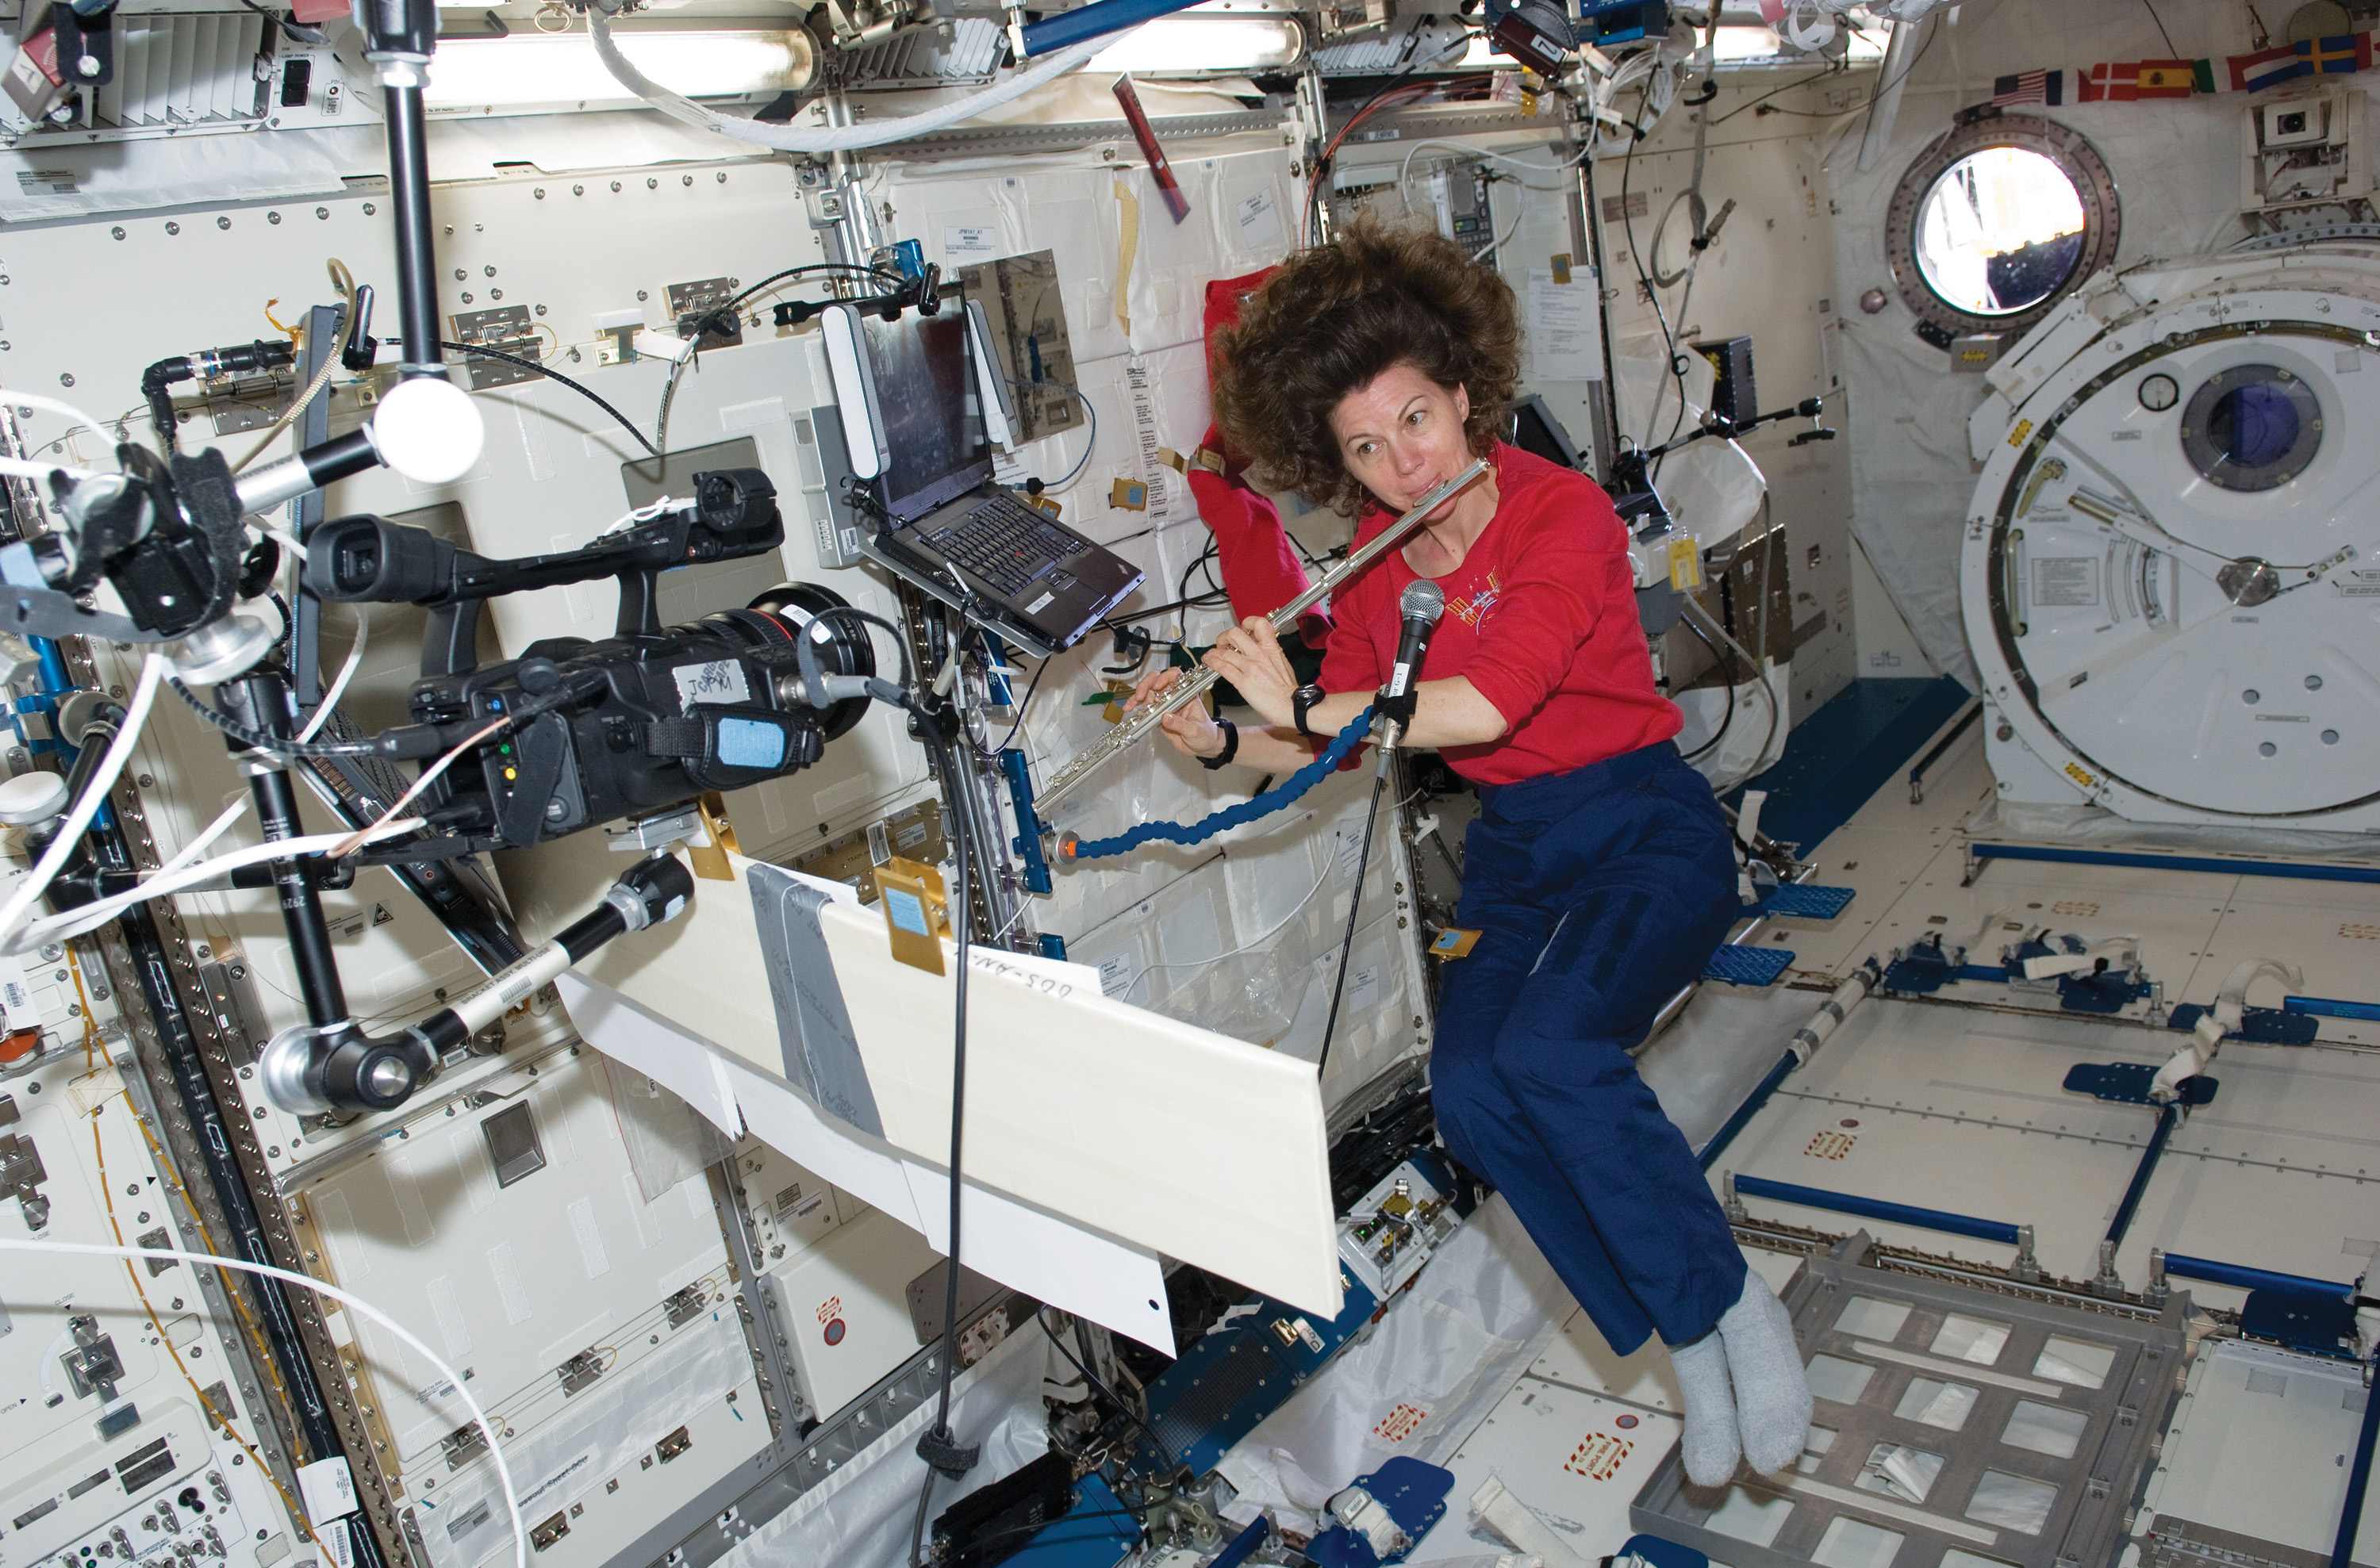 Coleman on ISS